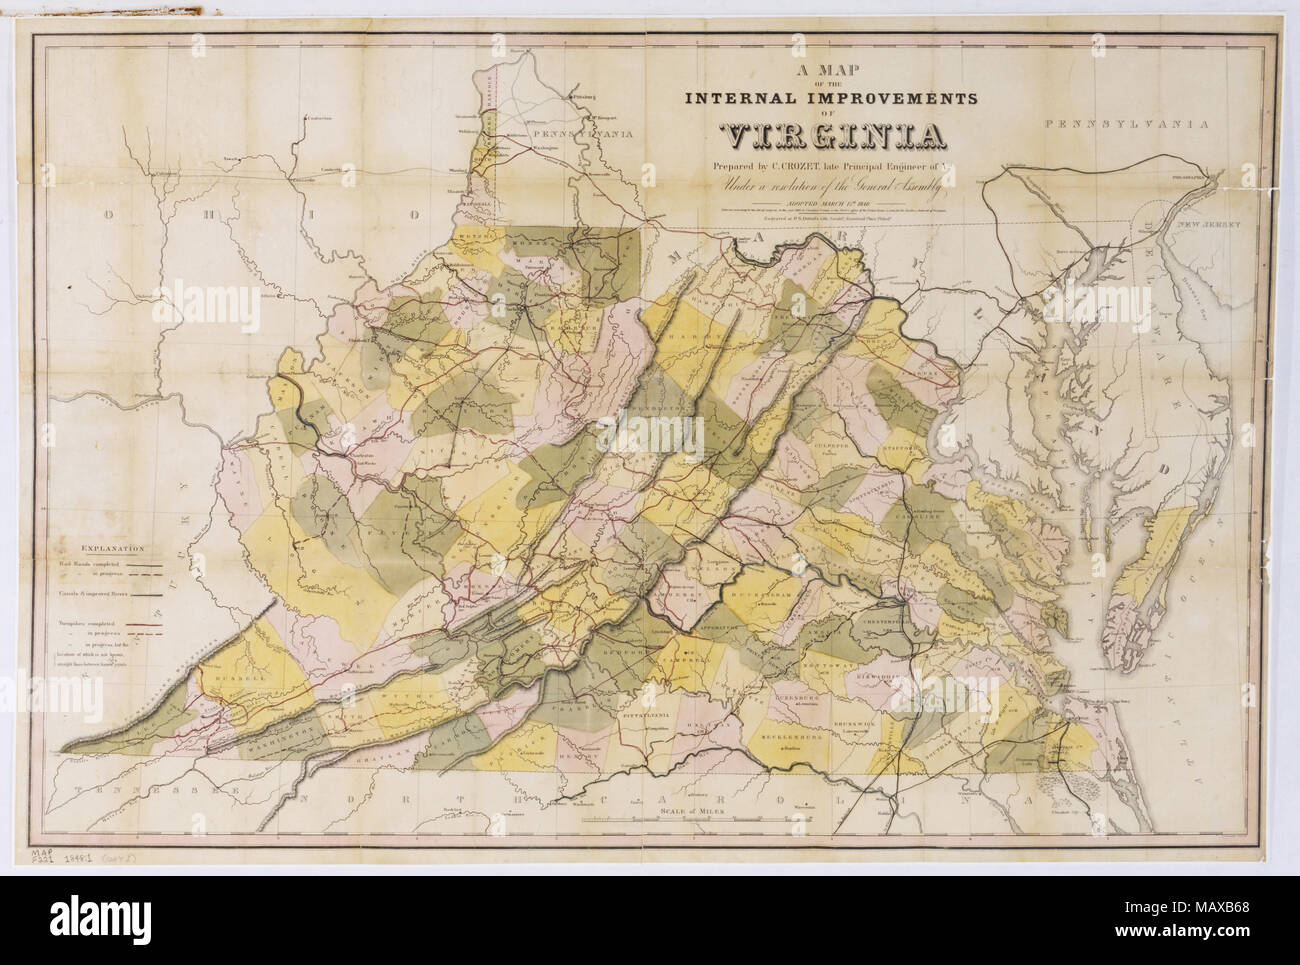 A Map of the Internal Improvements of Virginia, 1848 Stock Photo